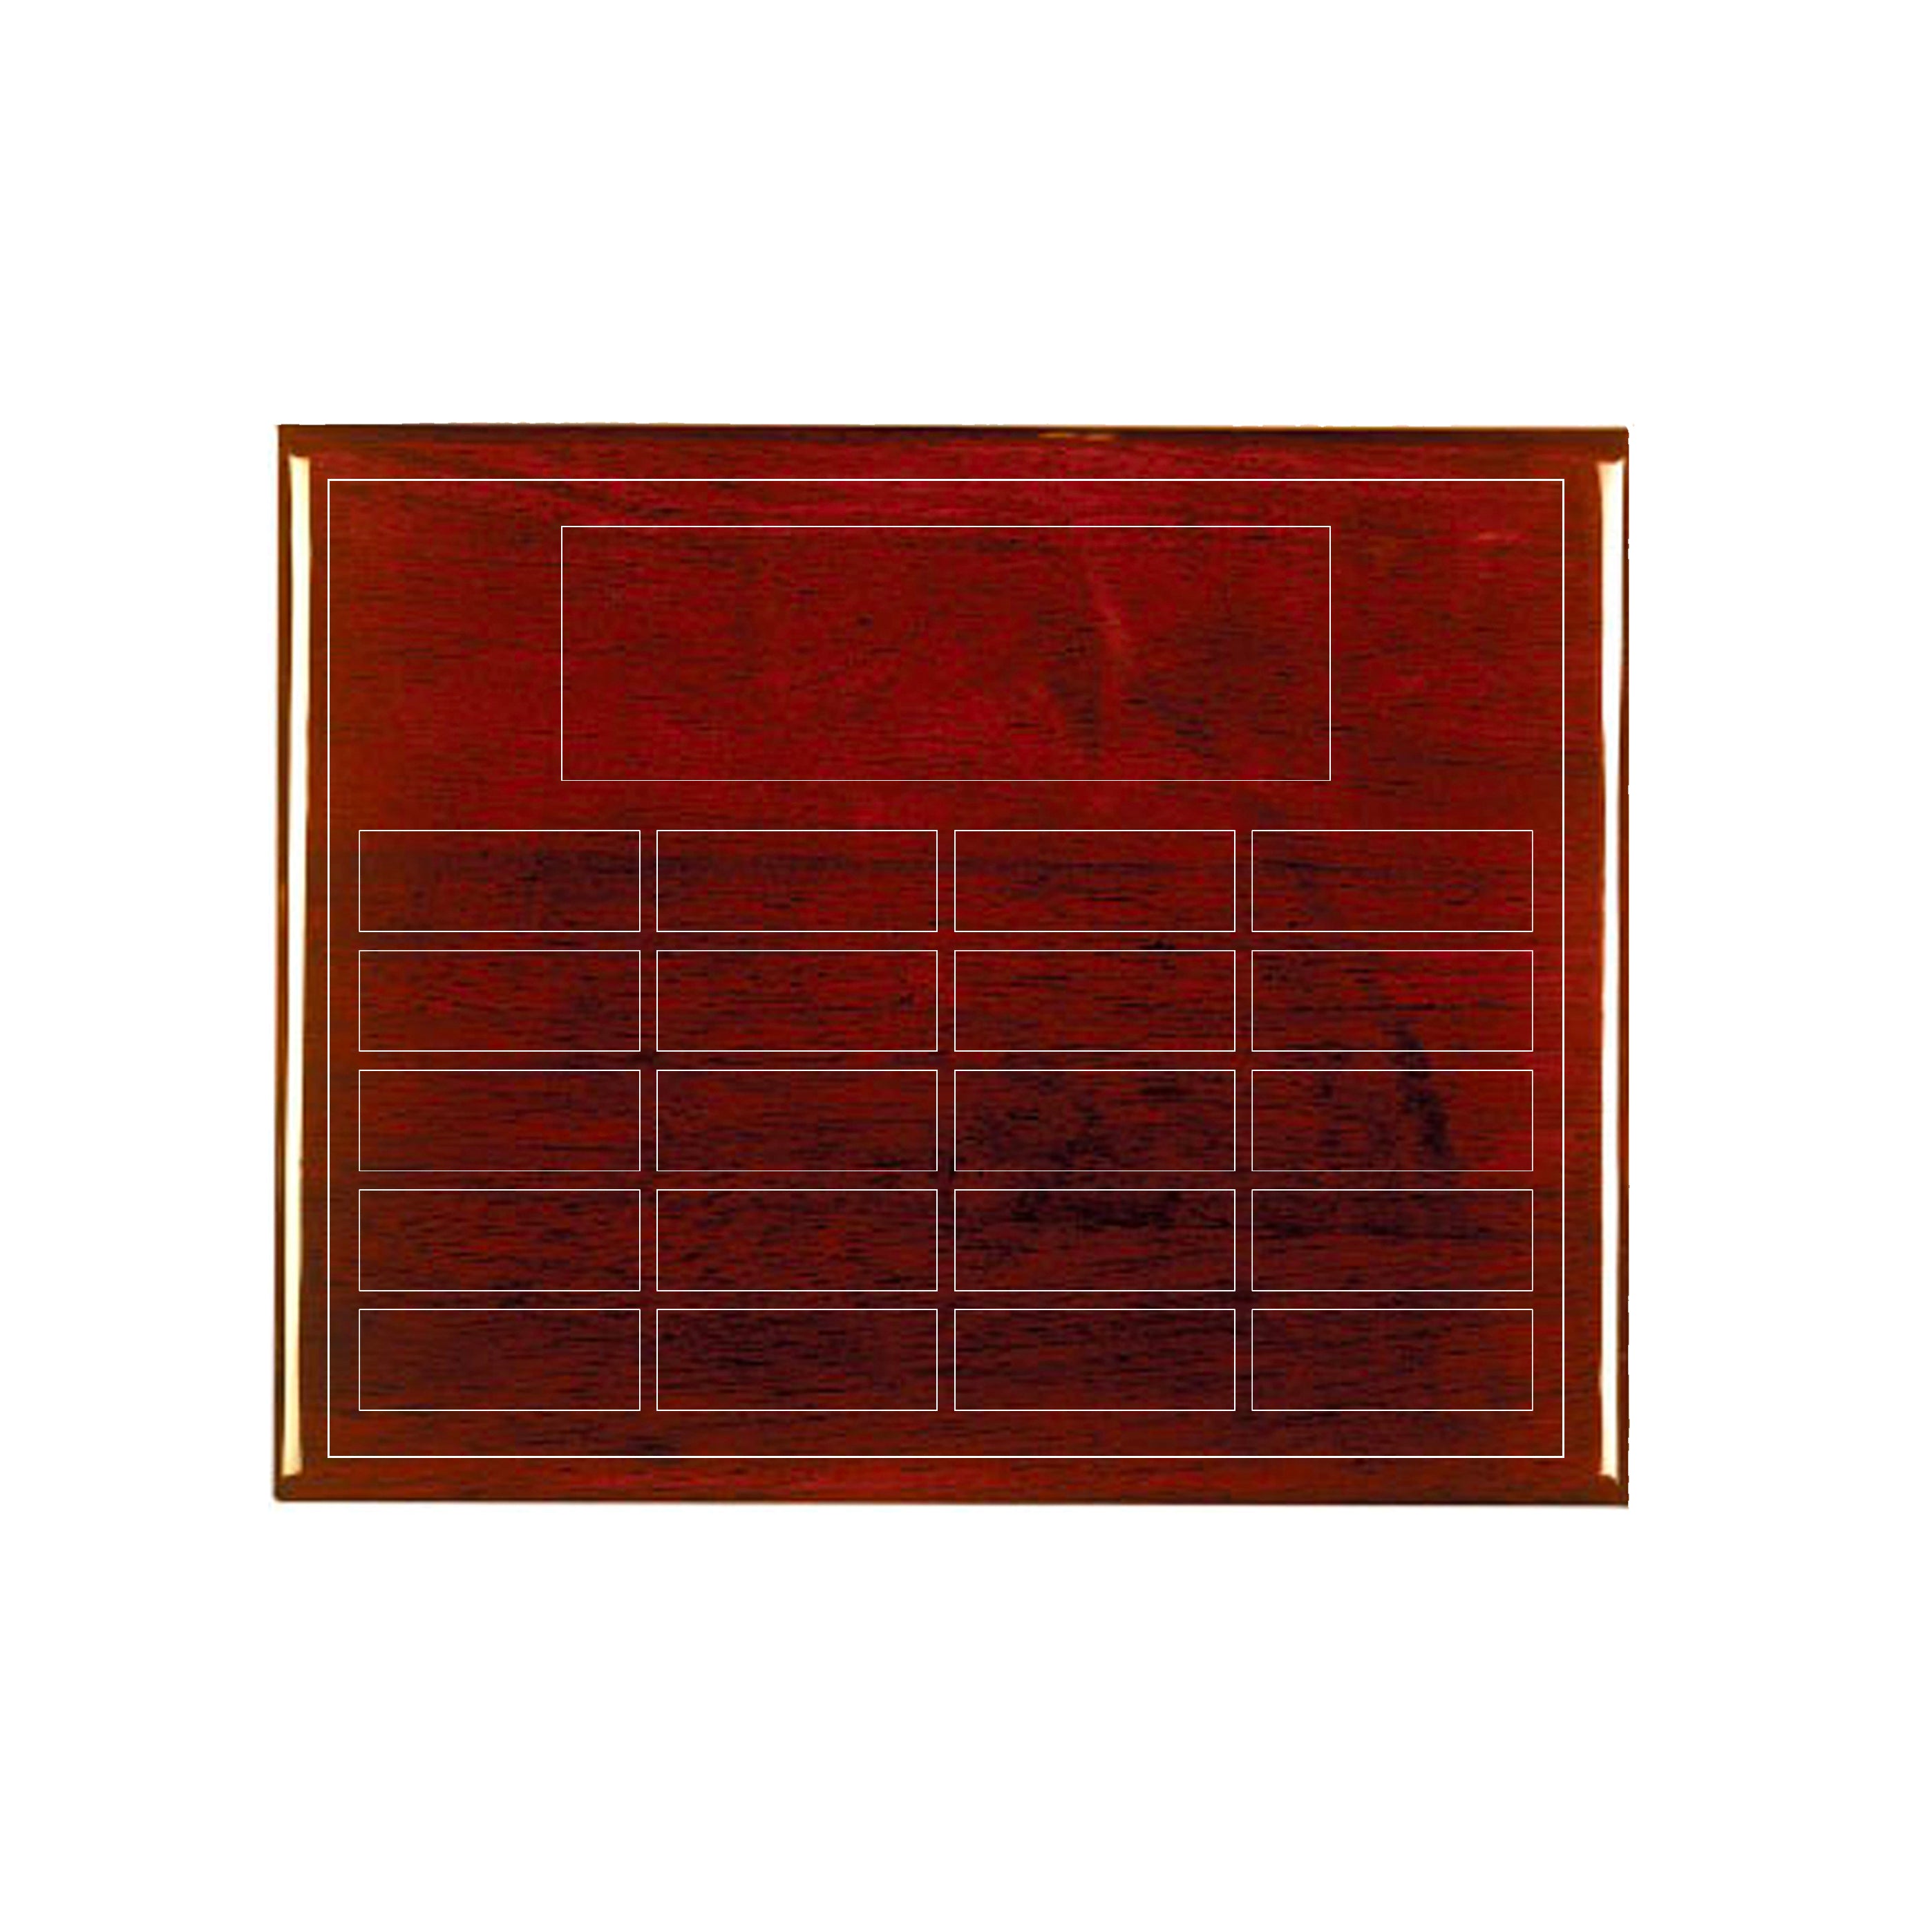 20 Plate Annual Award Plaque - 10" x 13" Rosewood Piano Finish - Nothers